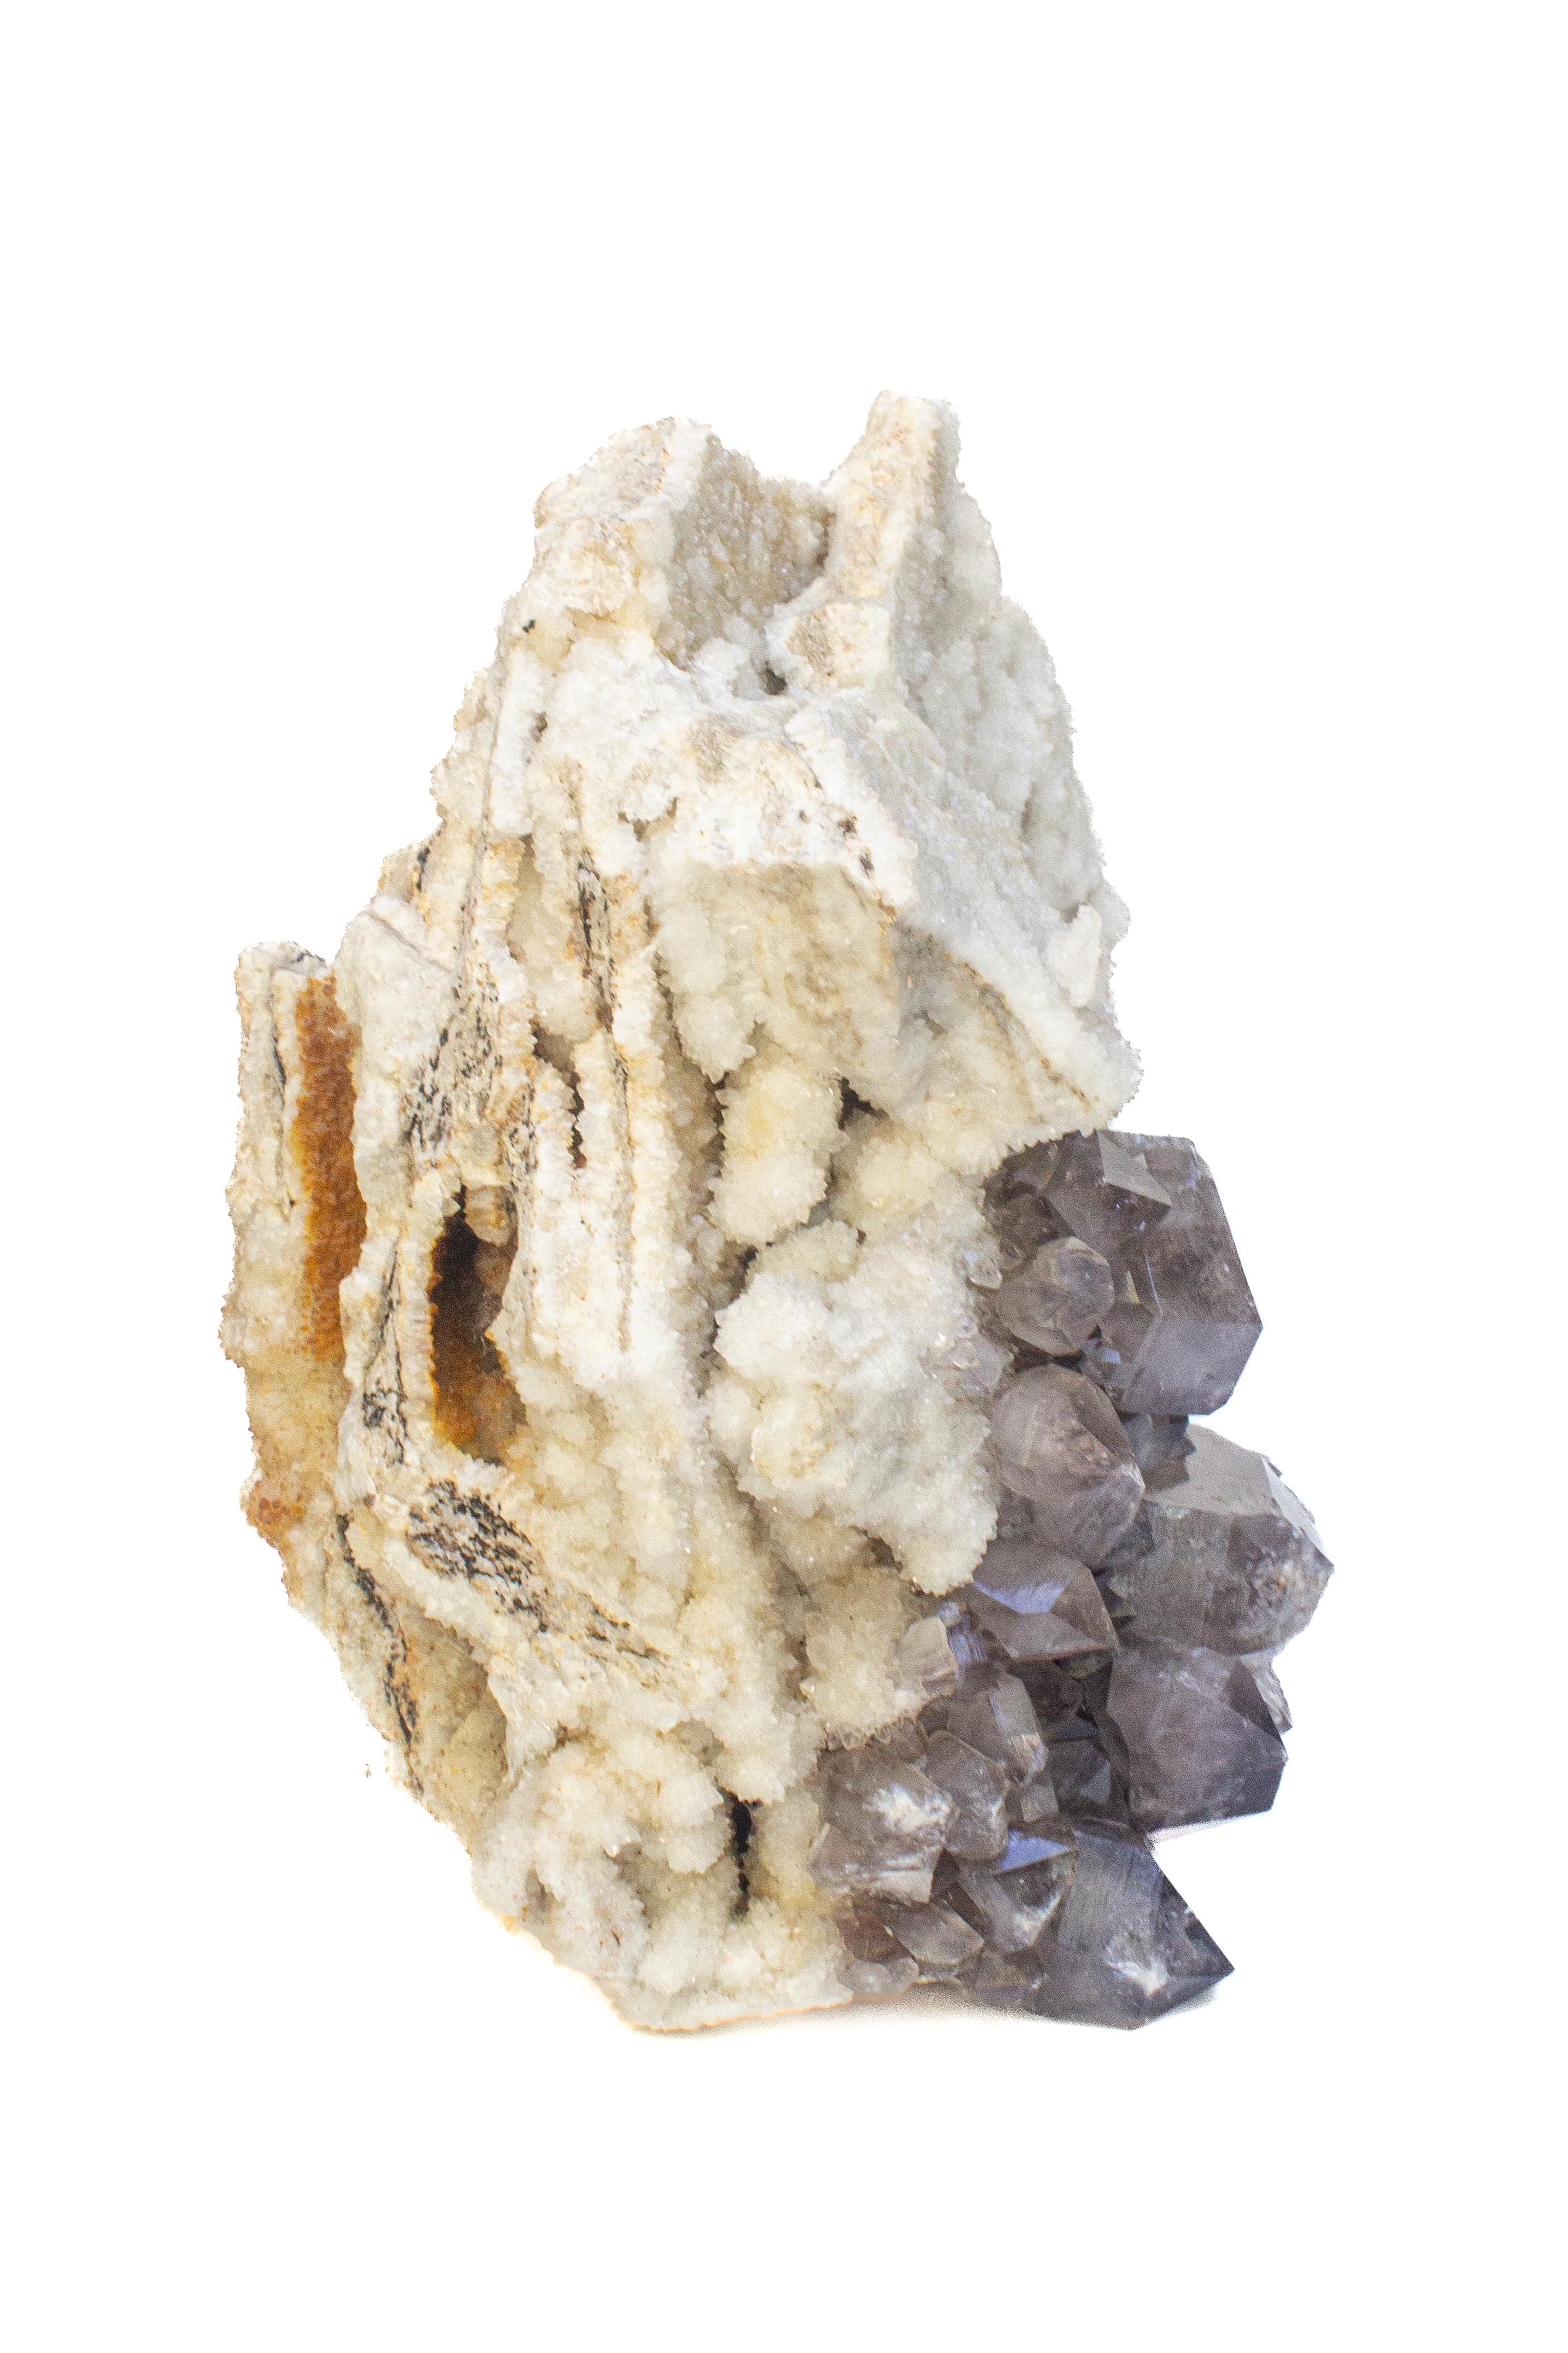 Large Milky Quartz Crystal Cluster with Amethyst Crystals In Excellent Condition For Sale In Dublin, Dalkey